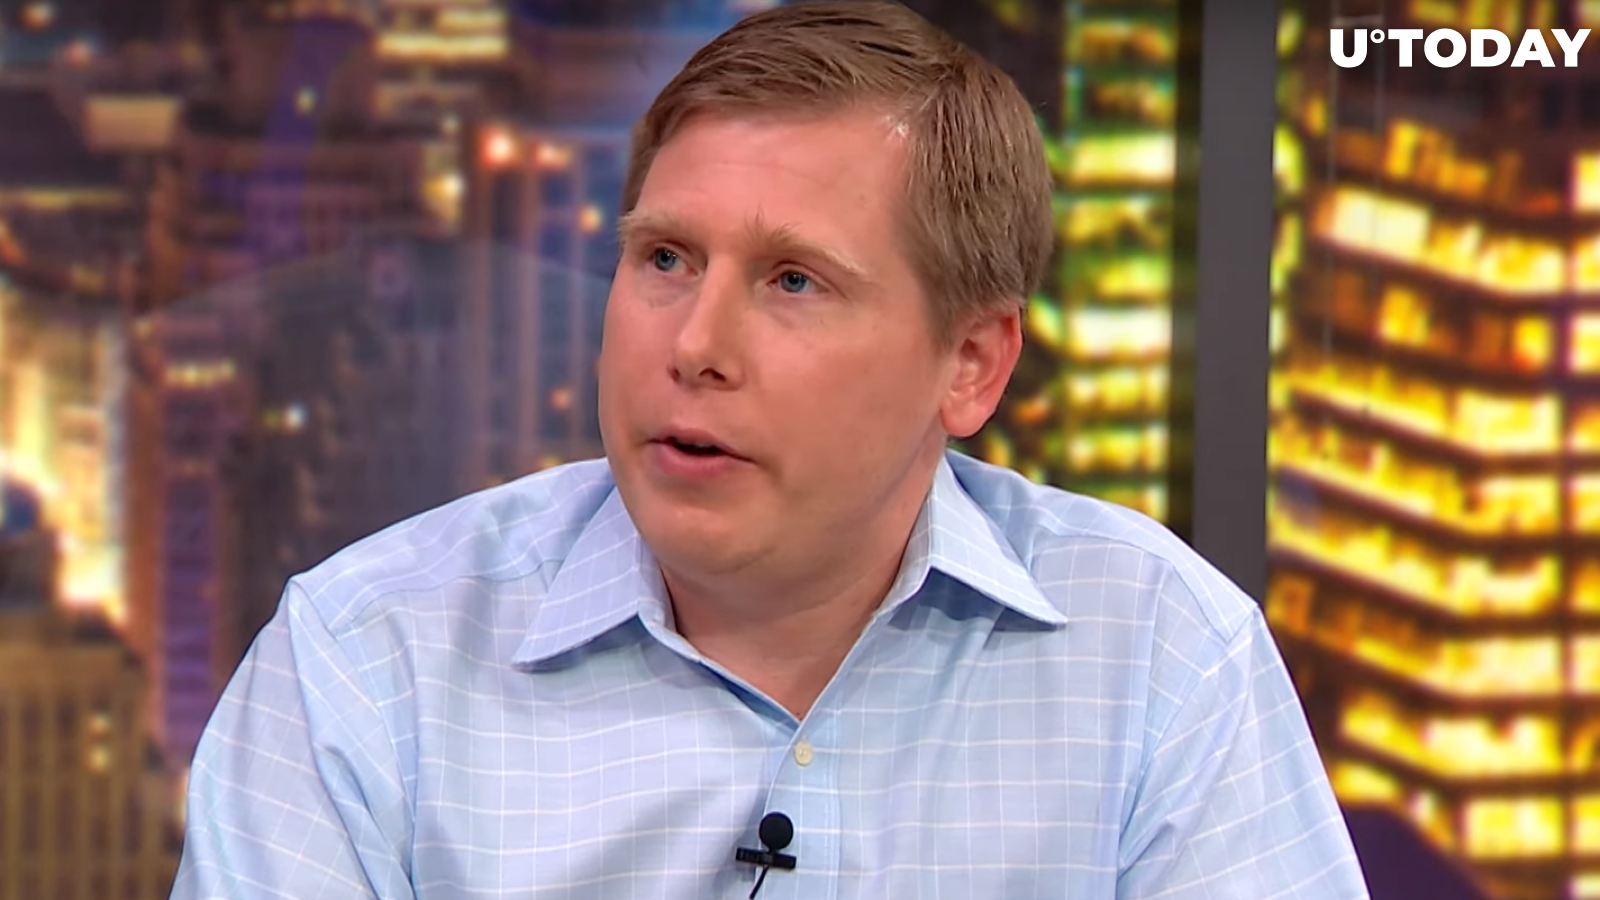 'Crypto King' Barry Silbert Says He Buys Bitcoin (BTC). Google Trends Show He's Not Alone